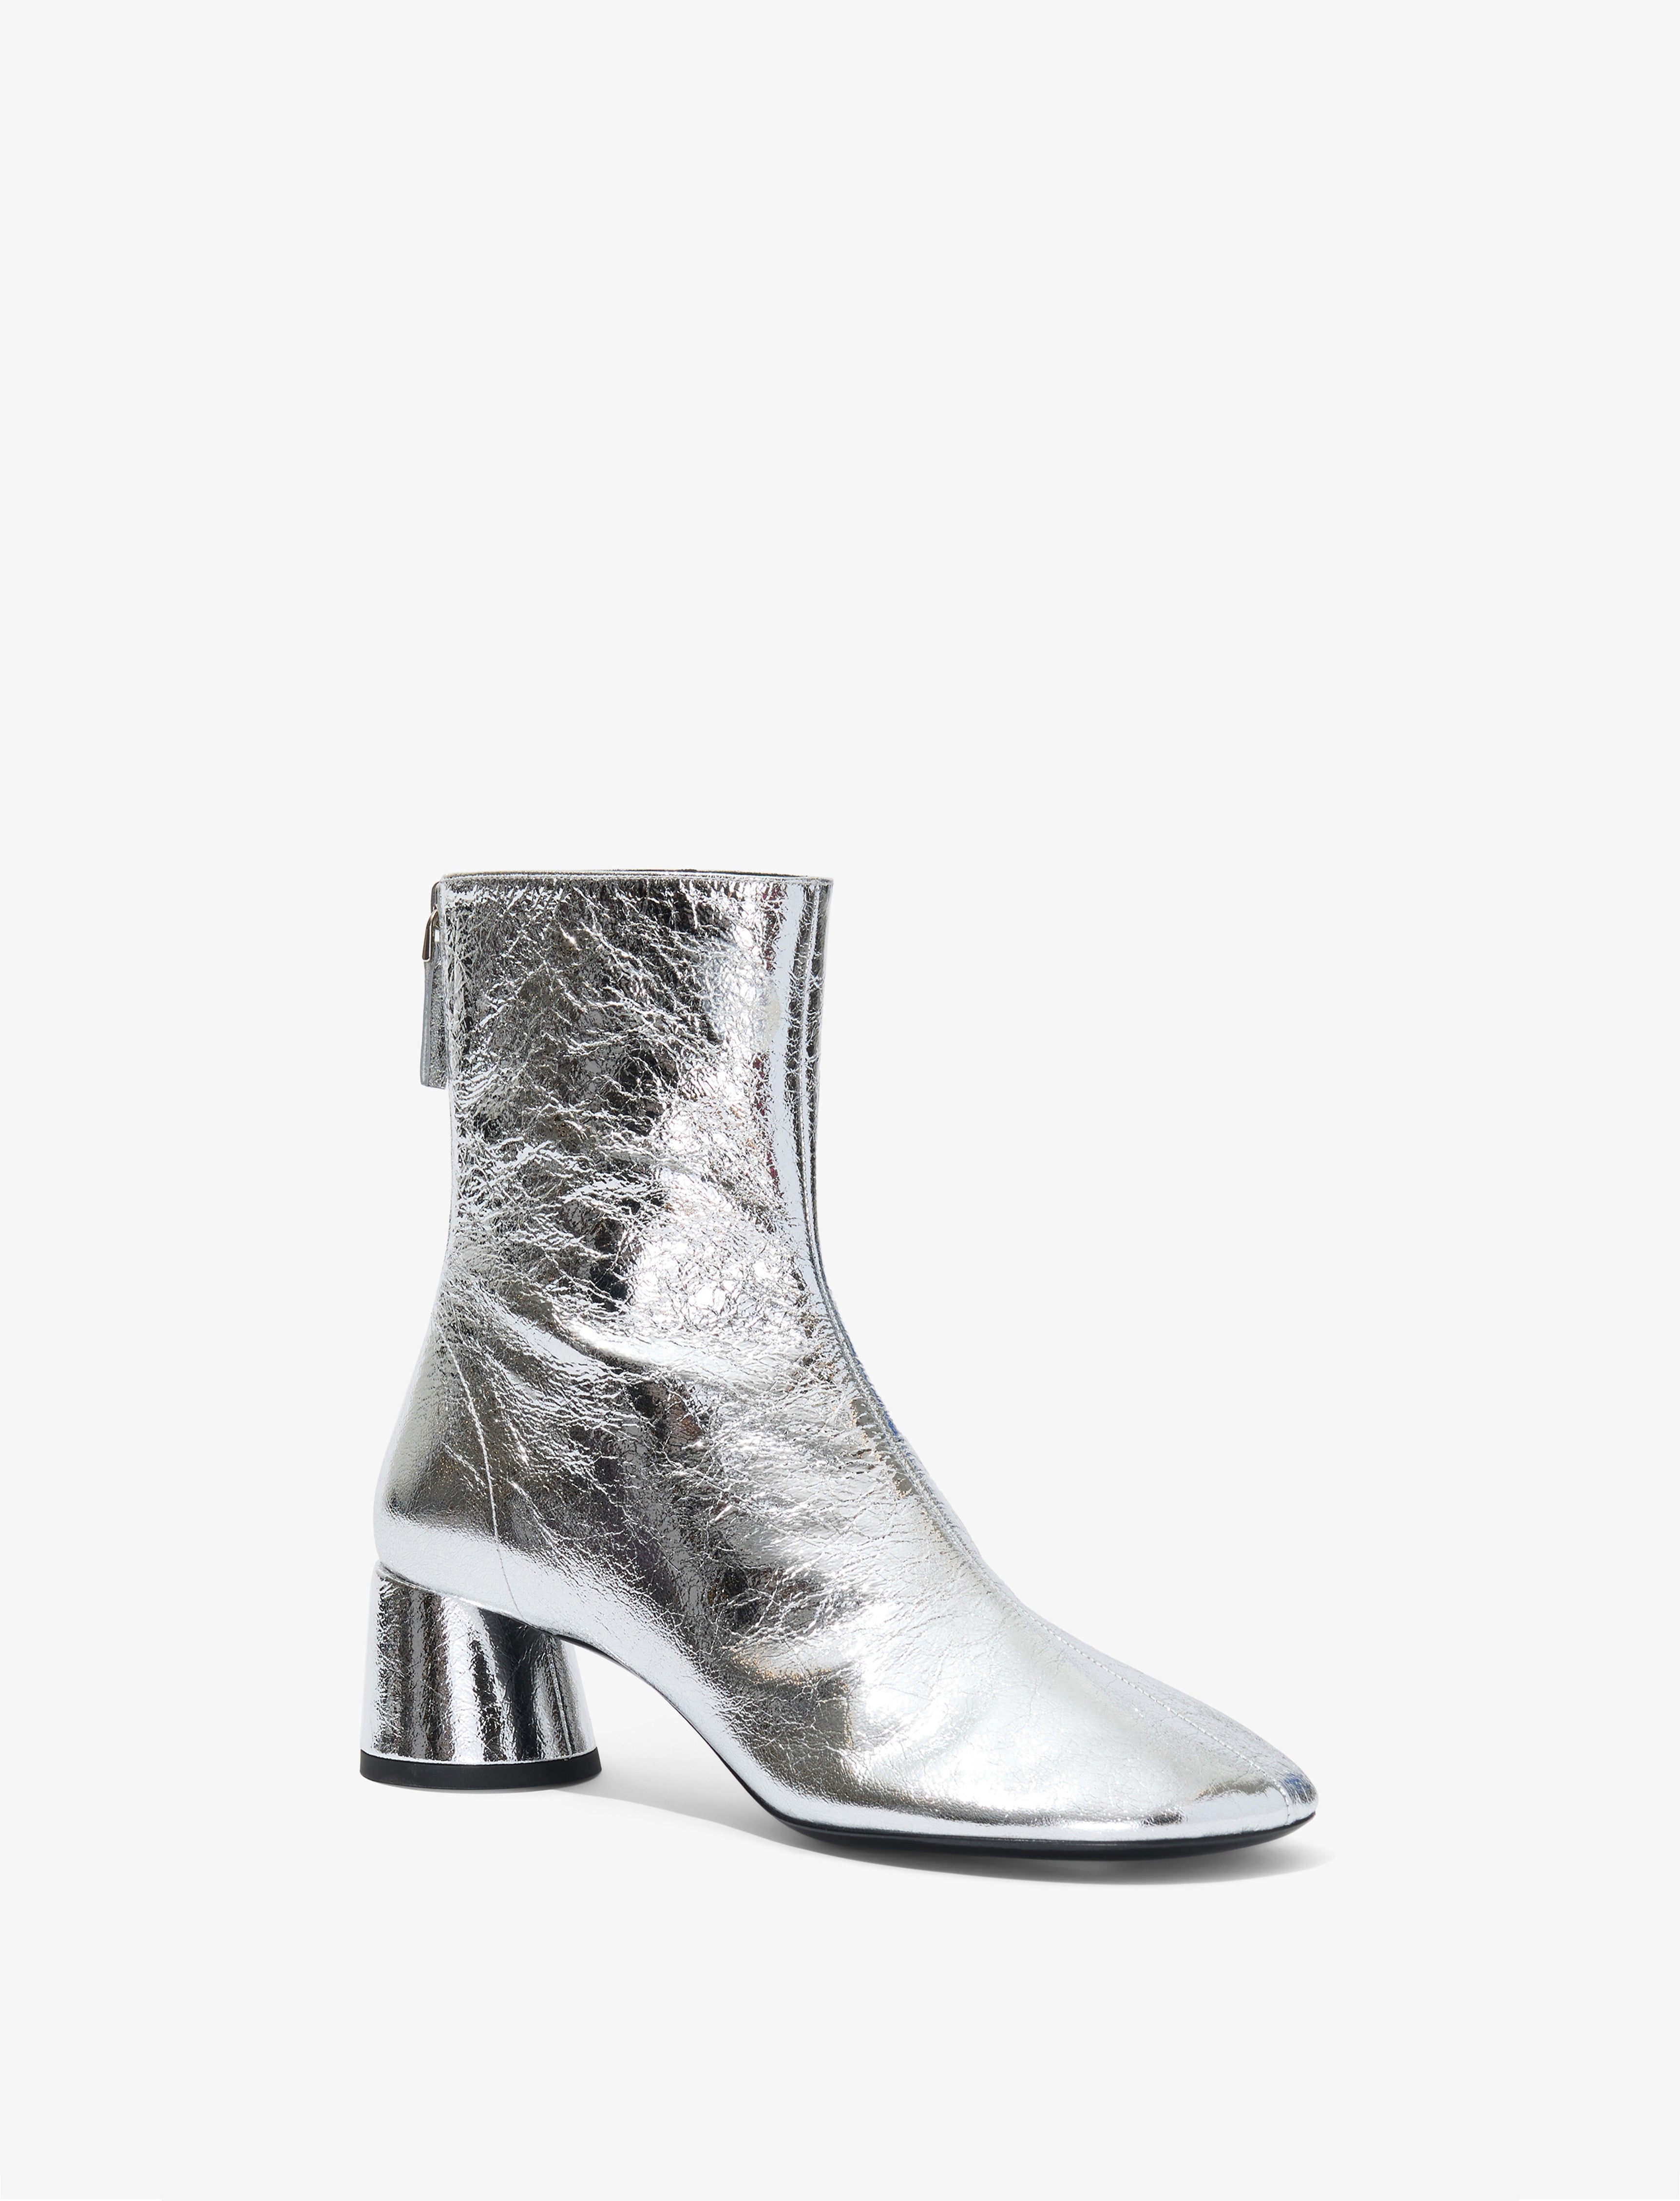 Glove Boots in Crinkled Metallic - 2